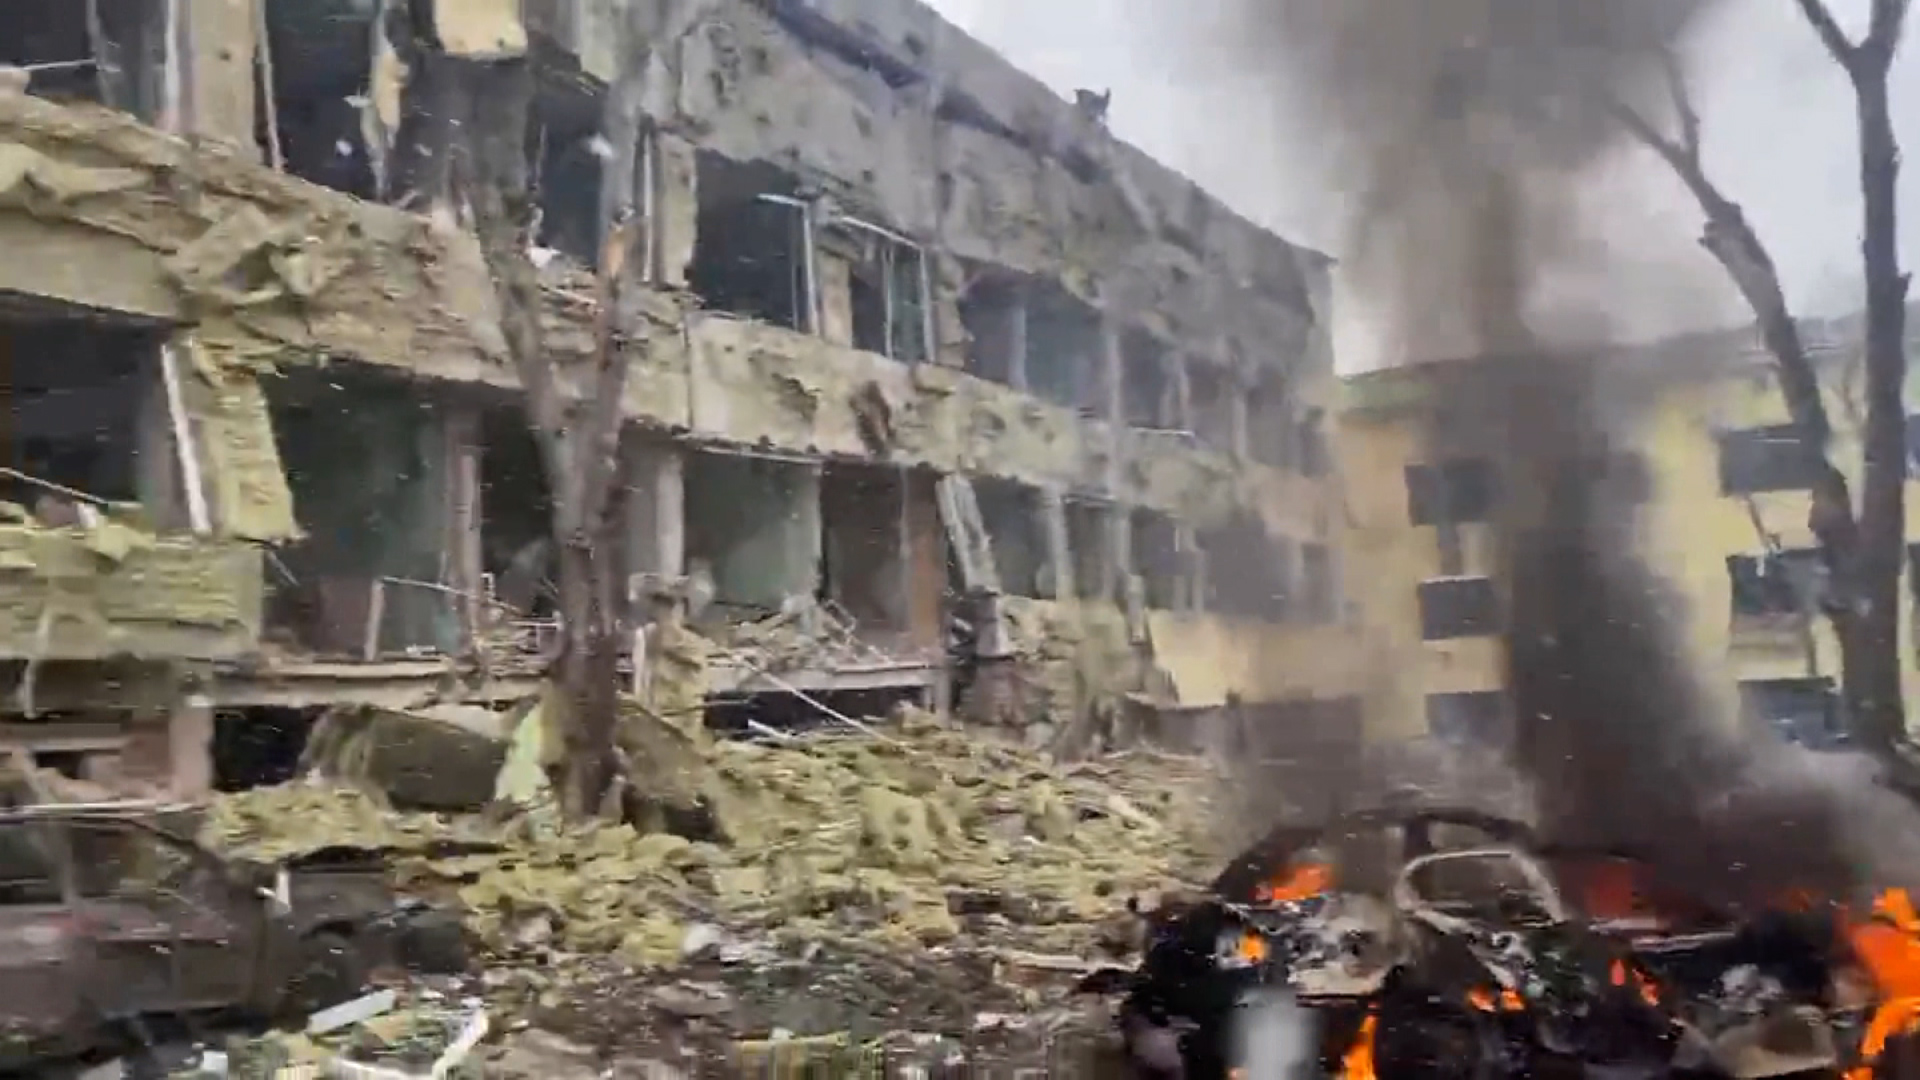 A vehicle burns at the site of a maternity hospital that was bombed in this image taken from video.